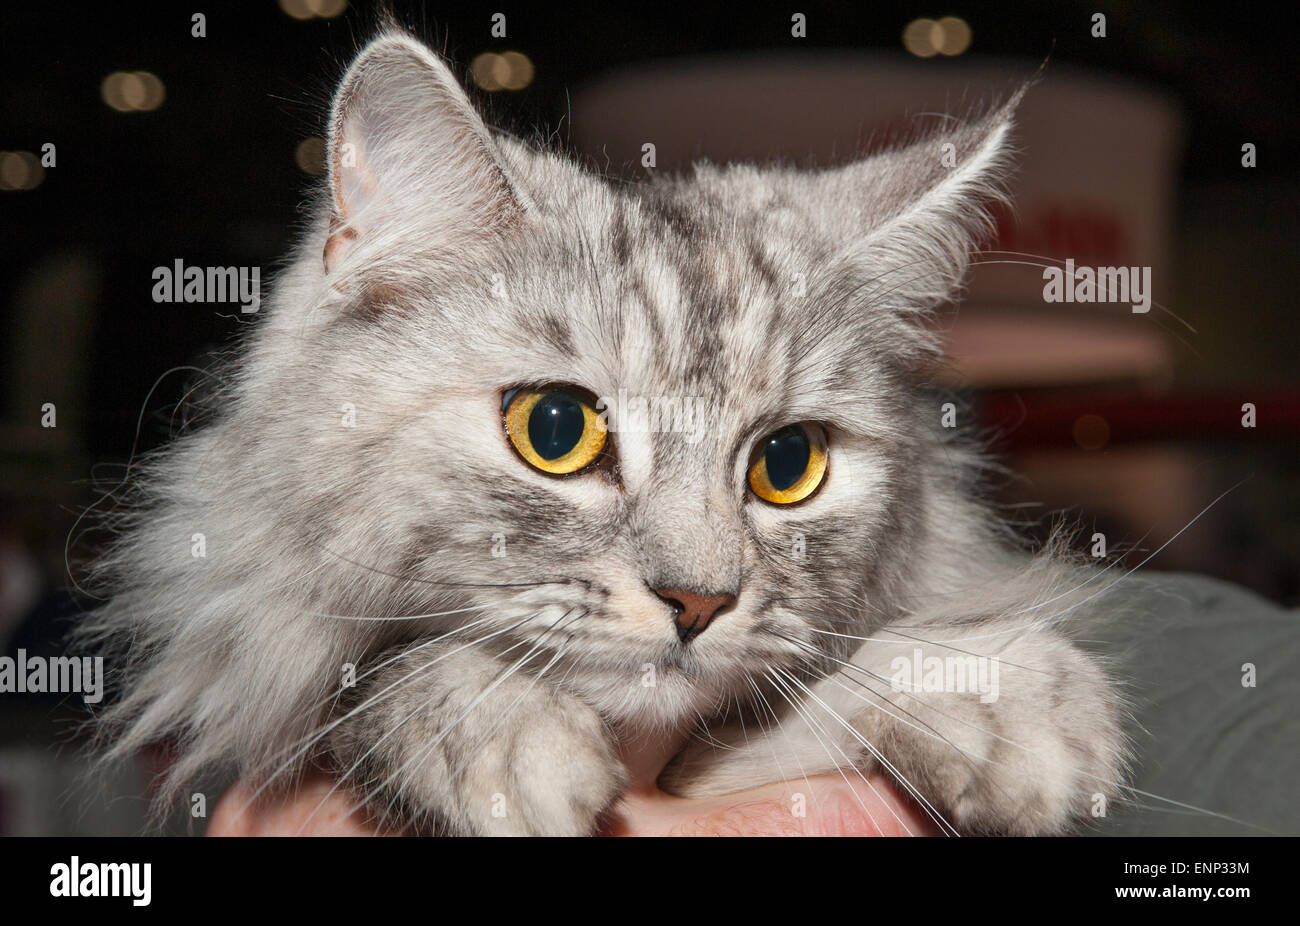 Excel, London, UK. 9th May, 2015. 5th London Pet Show features cats, dogs, jumping rabbits, reptiles, fish, horses and donkeys, running from 9th till 10th May. A Bicolour Ragdoll cat. Credit:  Malcolm Park editorial/Alamy Live News Stock Photo